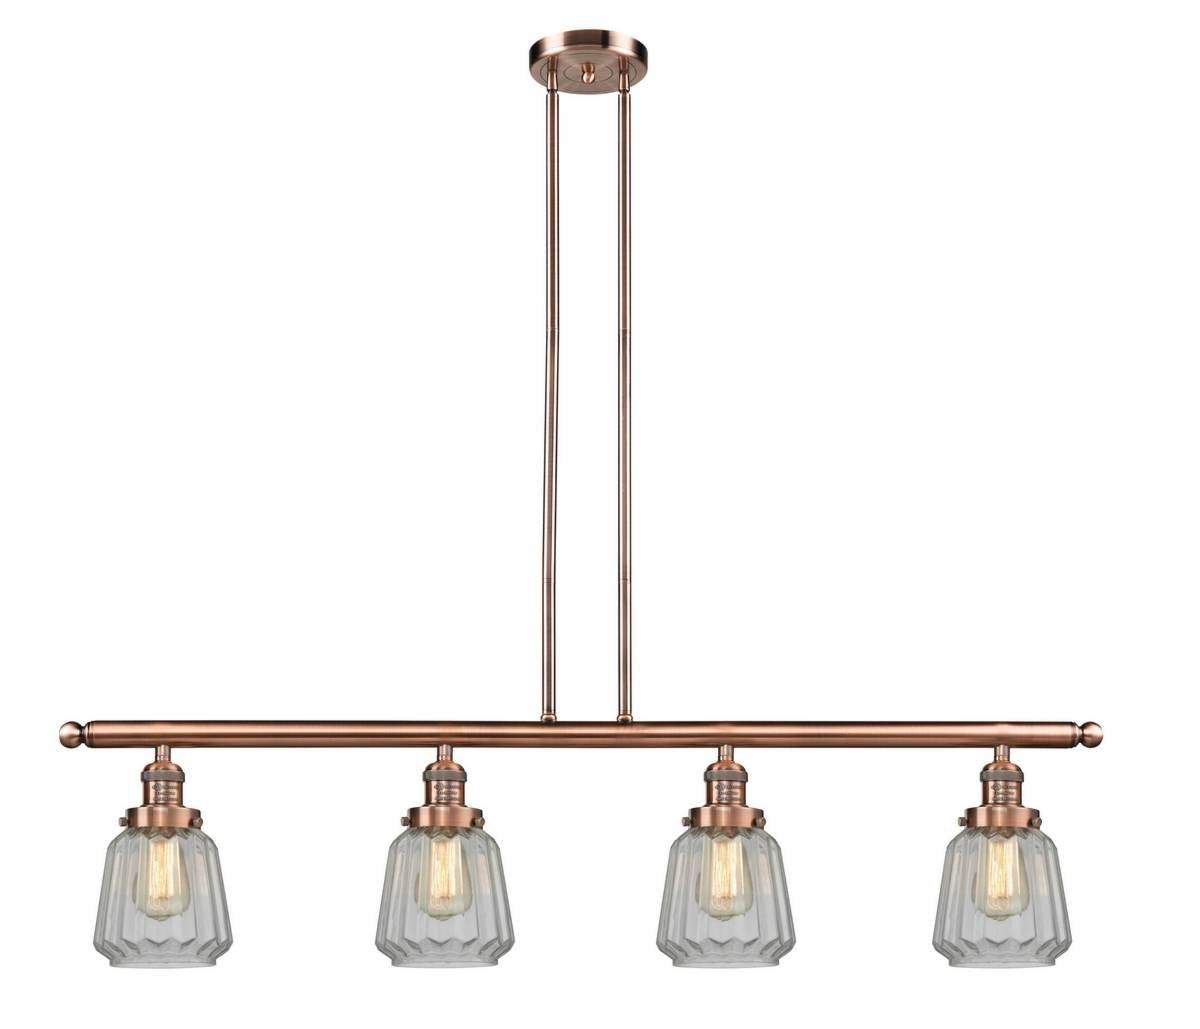 214-AC-G142 4-Light 50.875" Antique Copper Island Light - Clear Chatham Glass - LED Bulb - Dimmensions: 50.875 x 6.25 x 10<br>Minimum Height : 21<br>Maximum Height : 45 - Sloped Ceiling Compatible: Yes